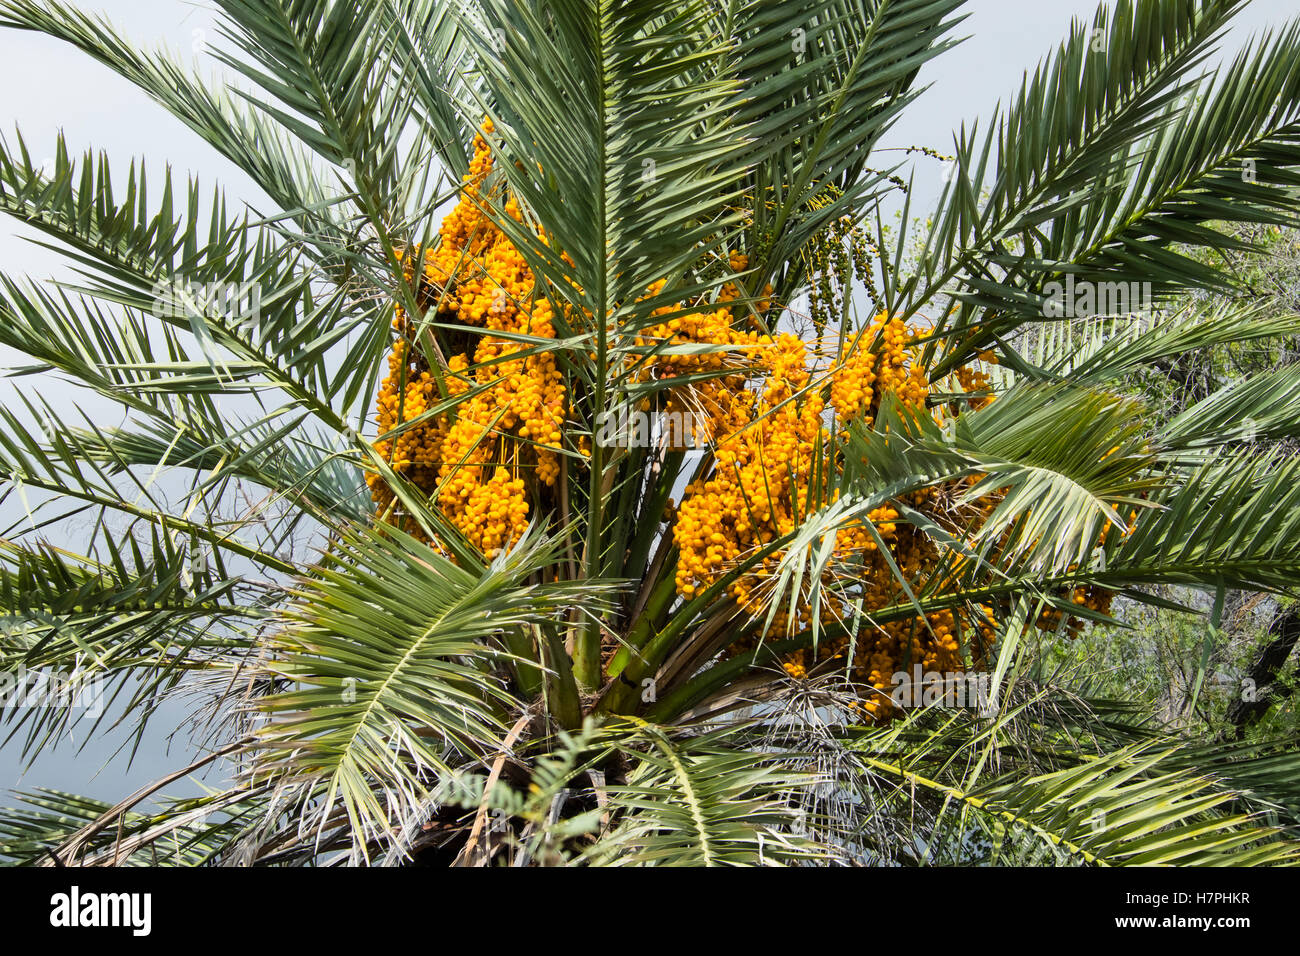 Palm tree fronds and palm nuts on palm tree in Big Bend National Park Texas Stock Photo